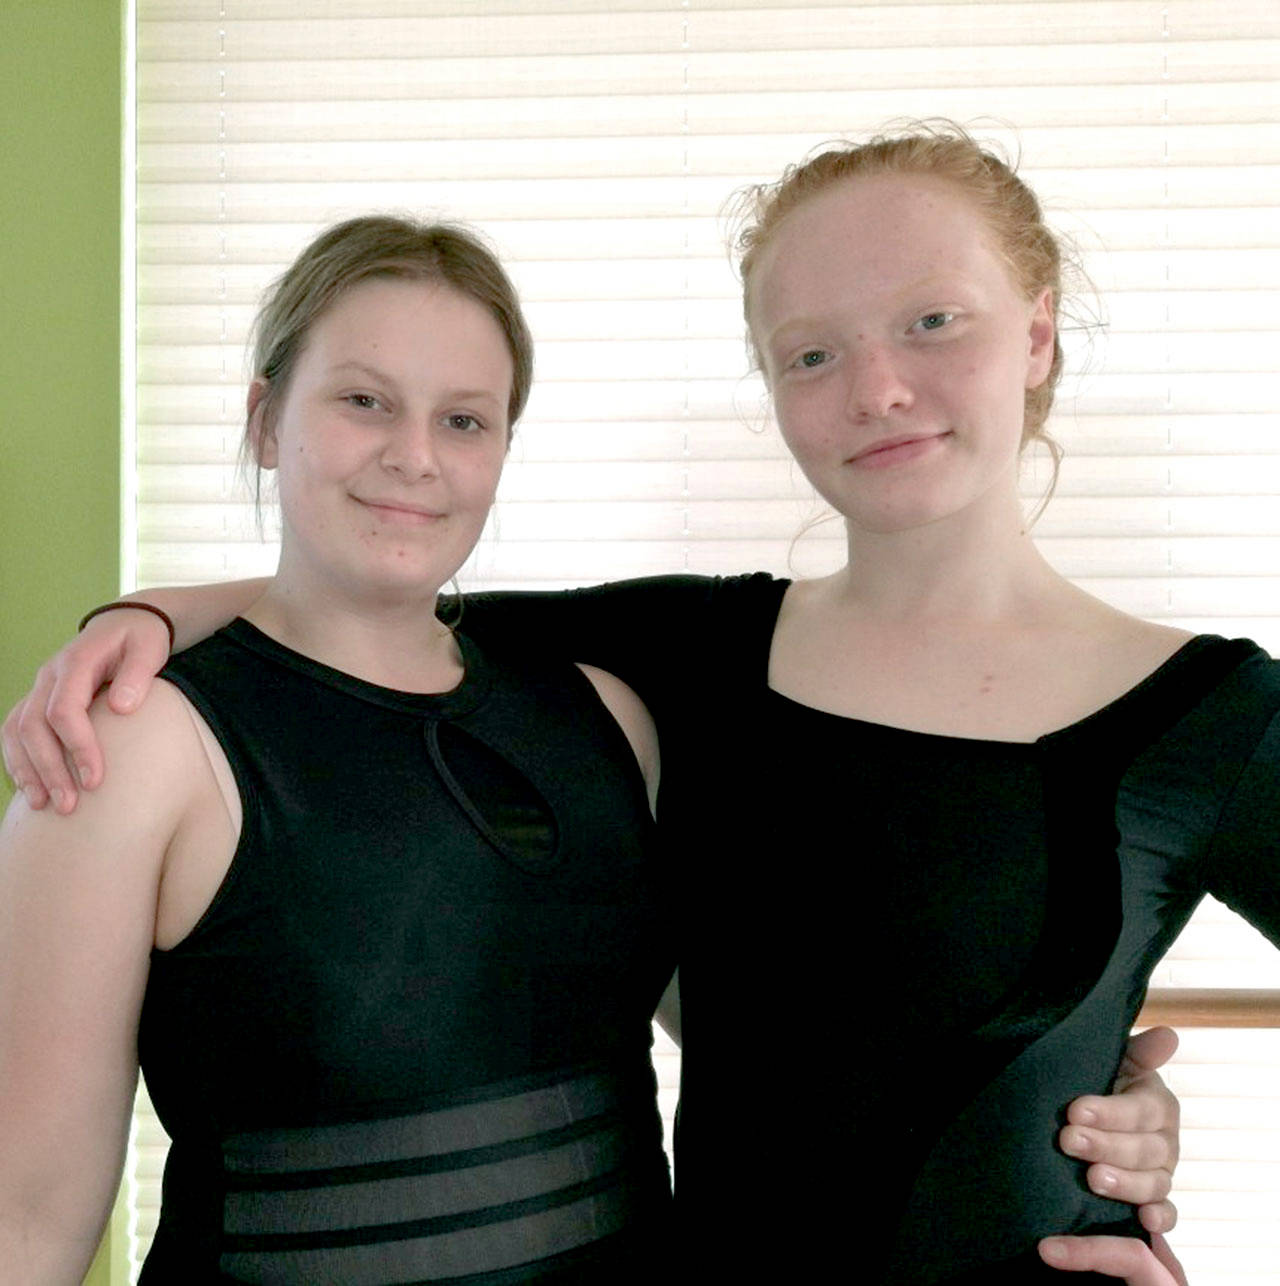 Saige Turner and Eleanor Byrne will perform a duet and both of them will perform solos with their own original choreography.